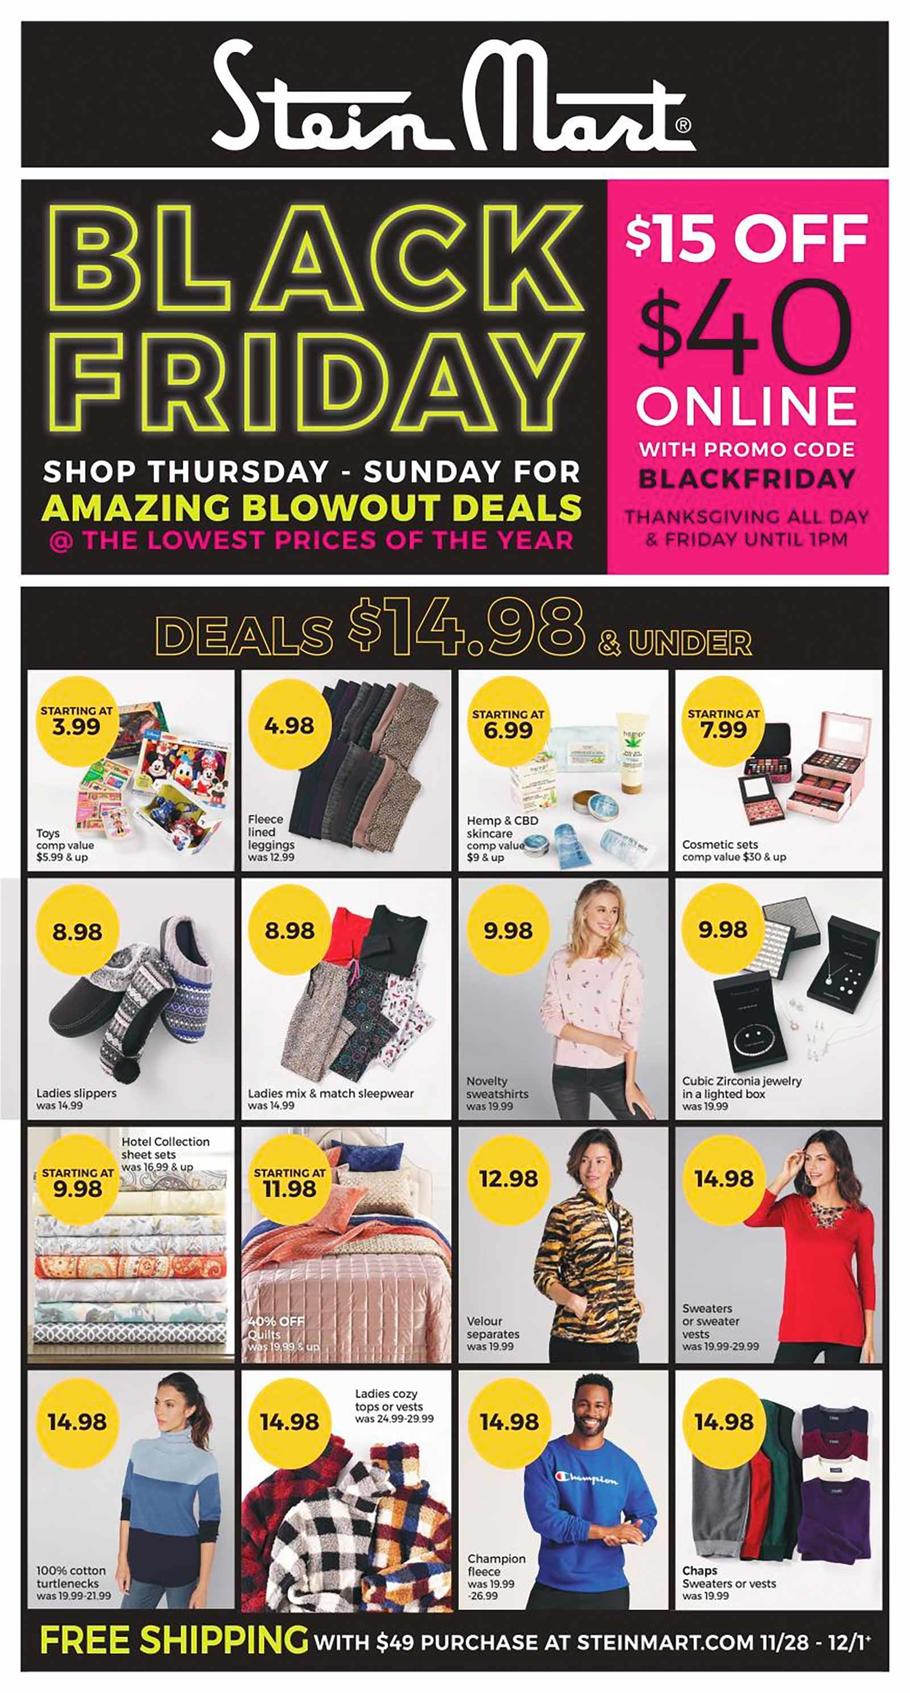 Stein Mart 2019 Black Friday Ad | Frugal Buzz - What Stores Are Still Having A Black Friday Sale